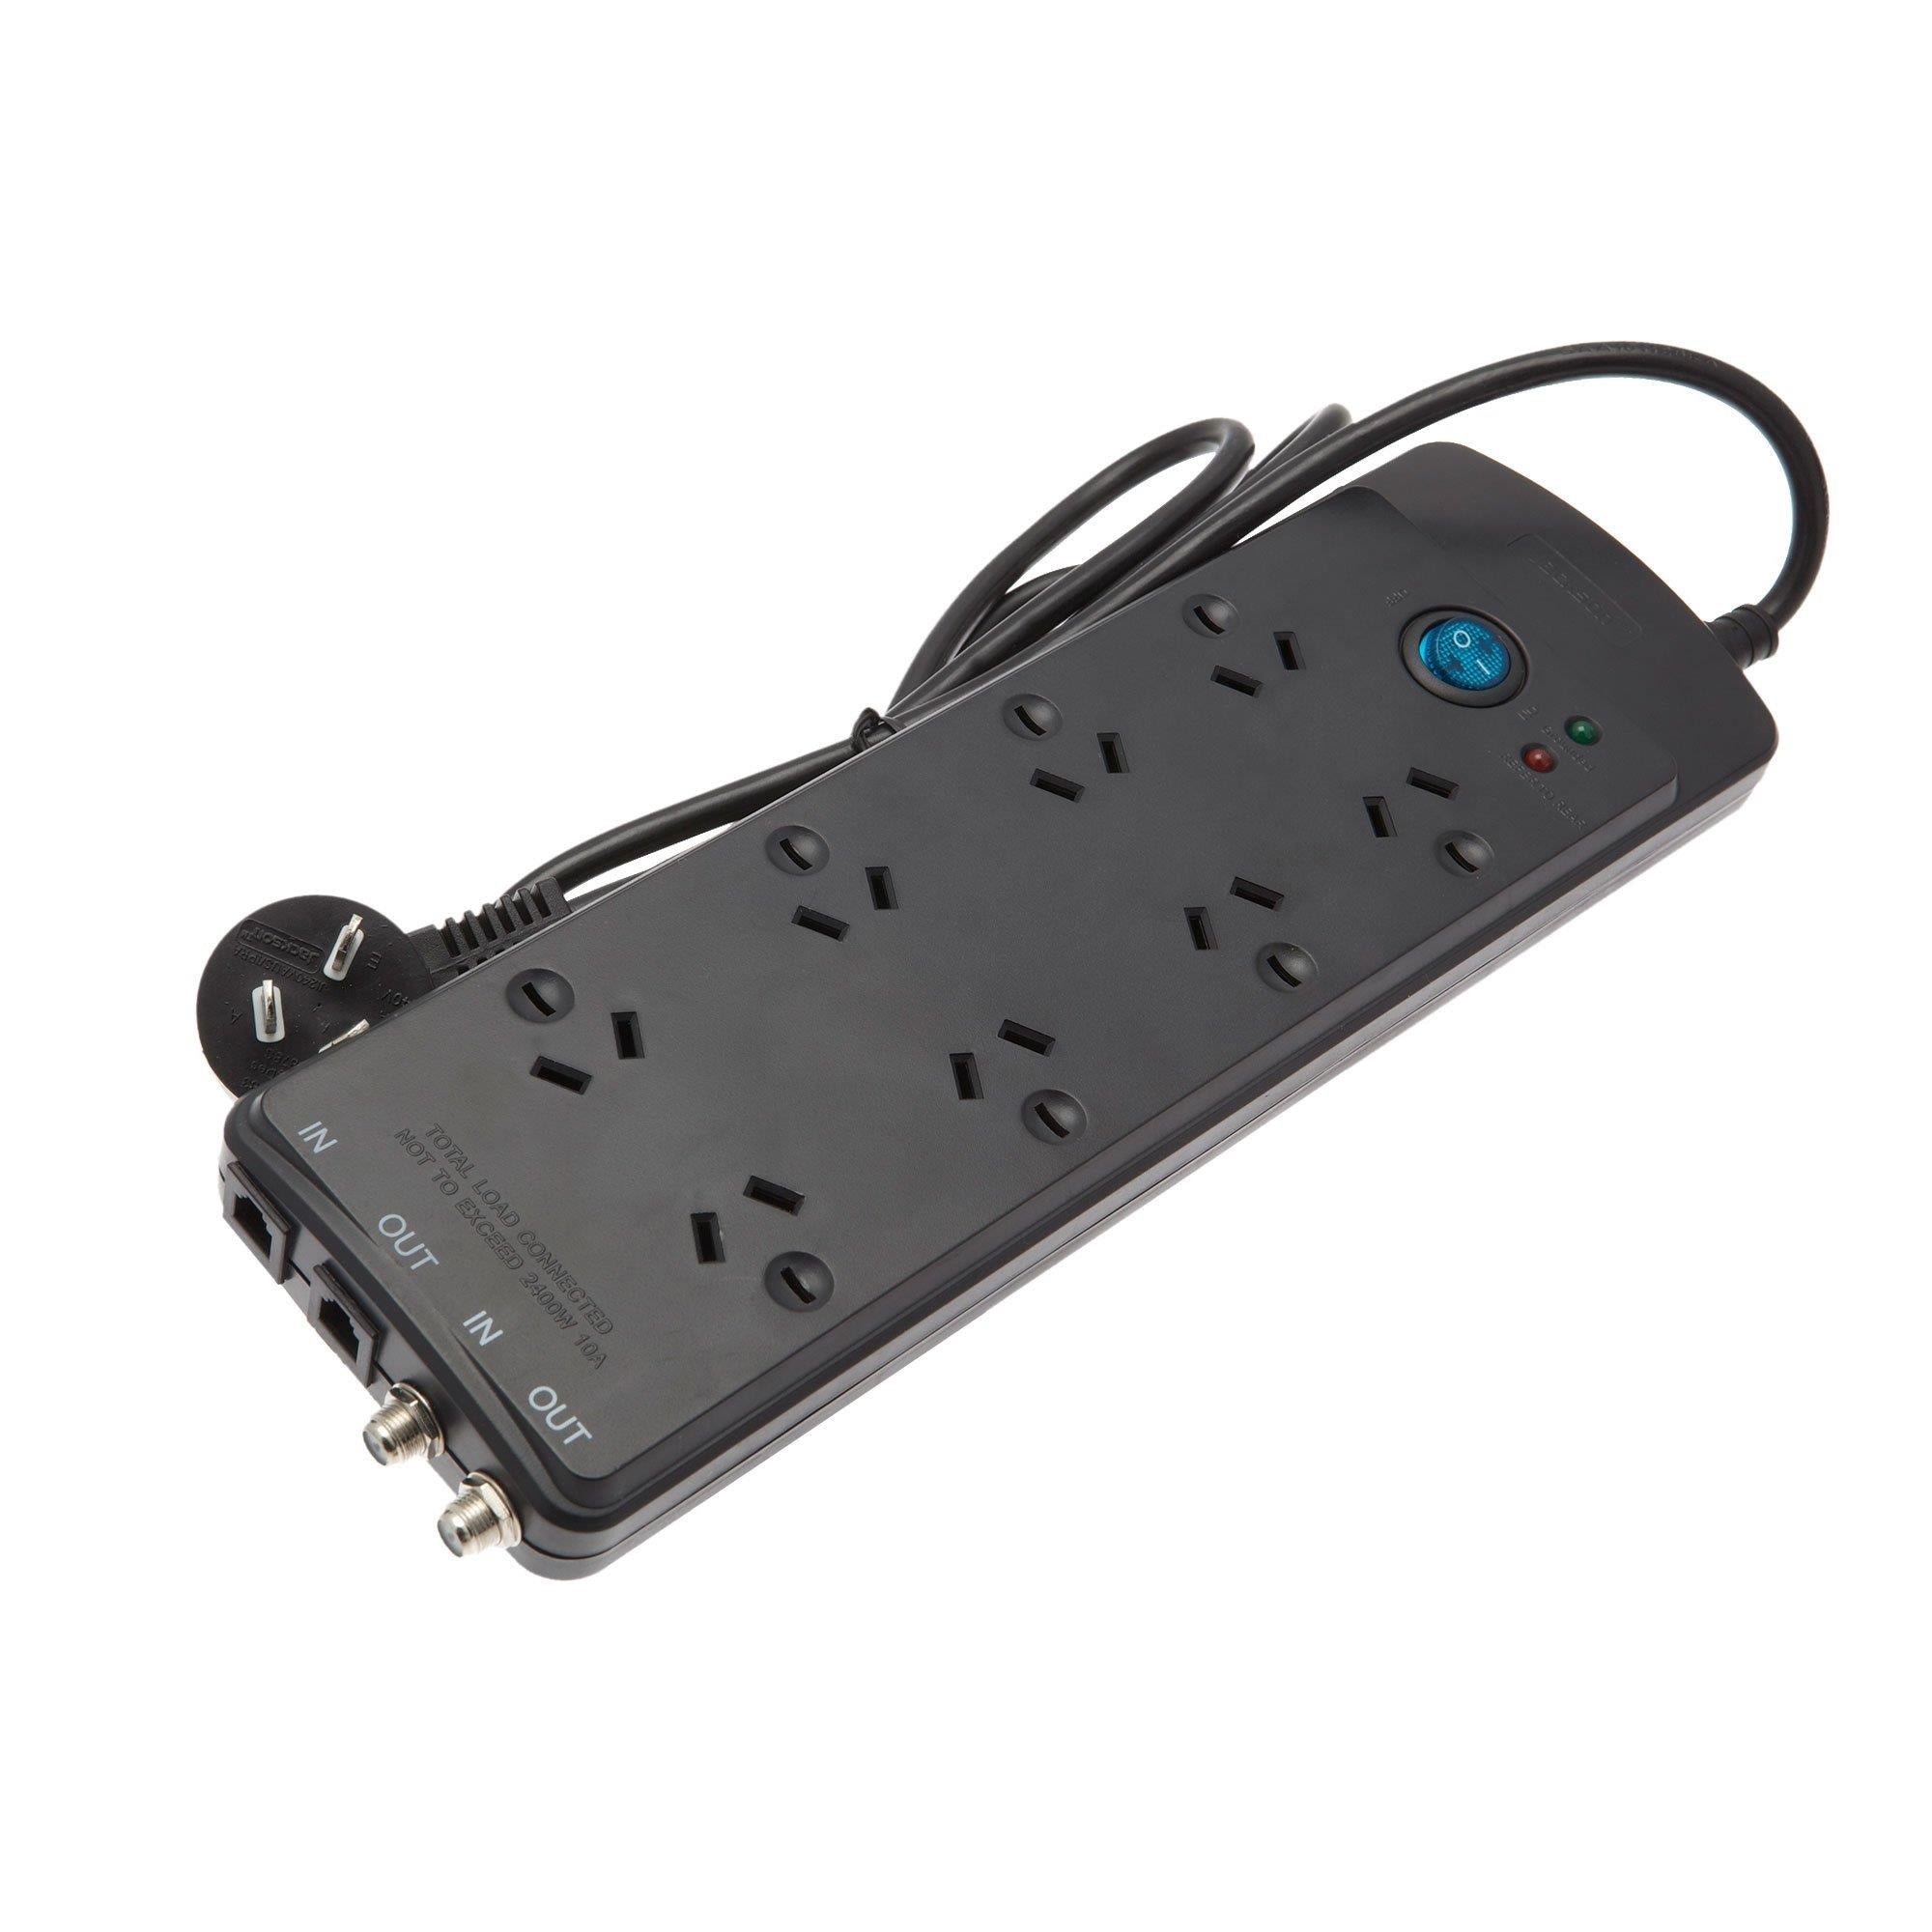 jackson surge protected board w/ 8 x power socket, coax + data outlets